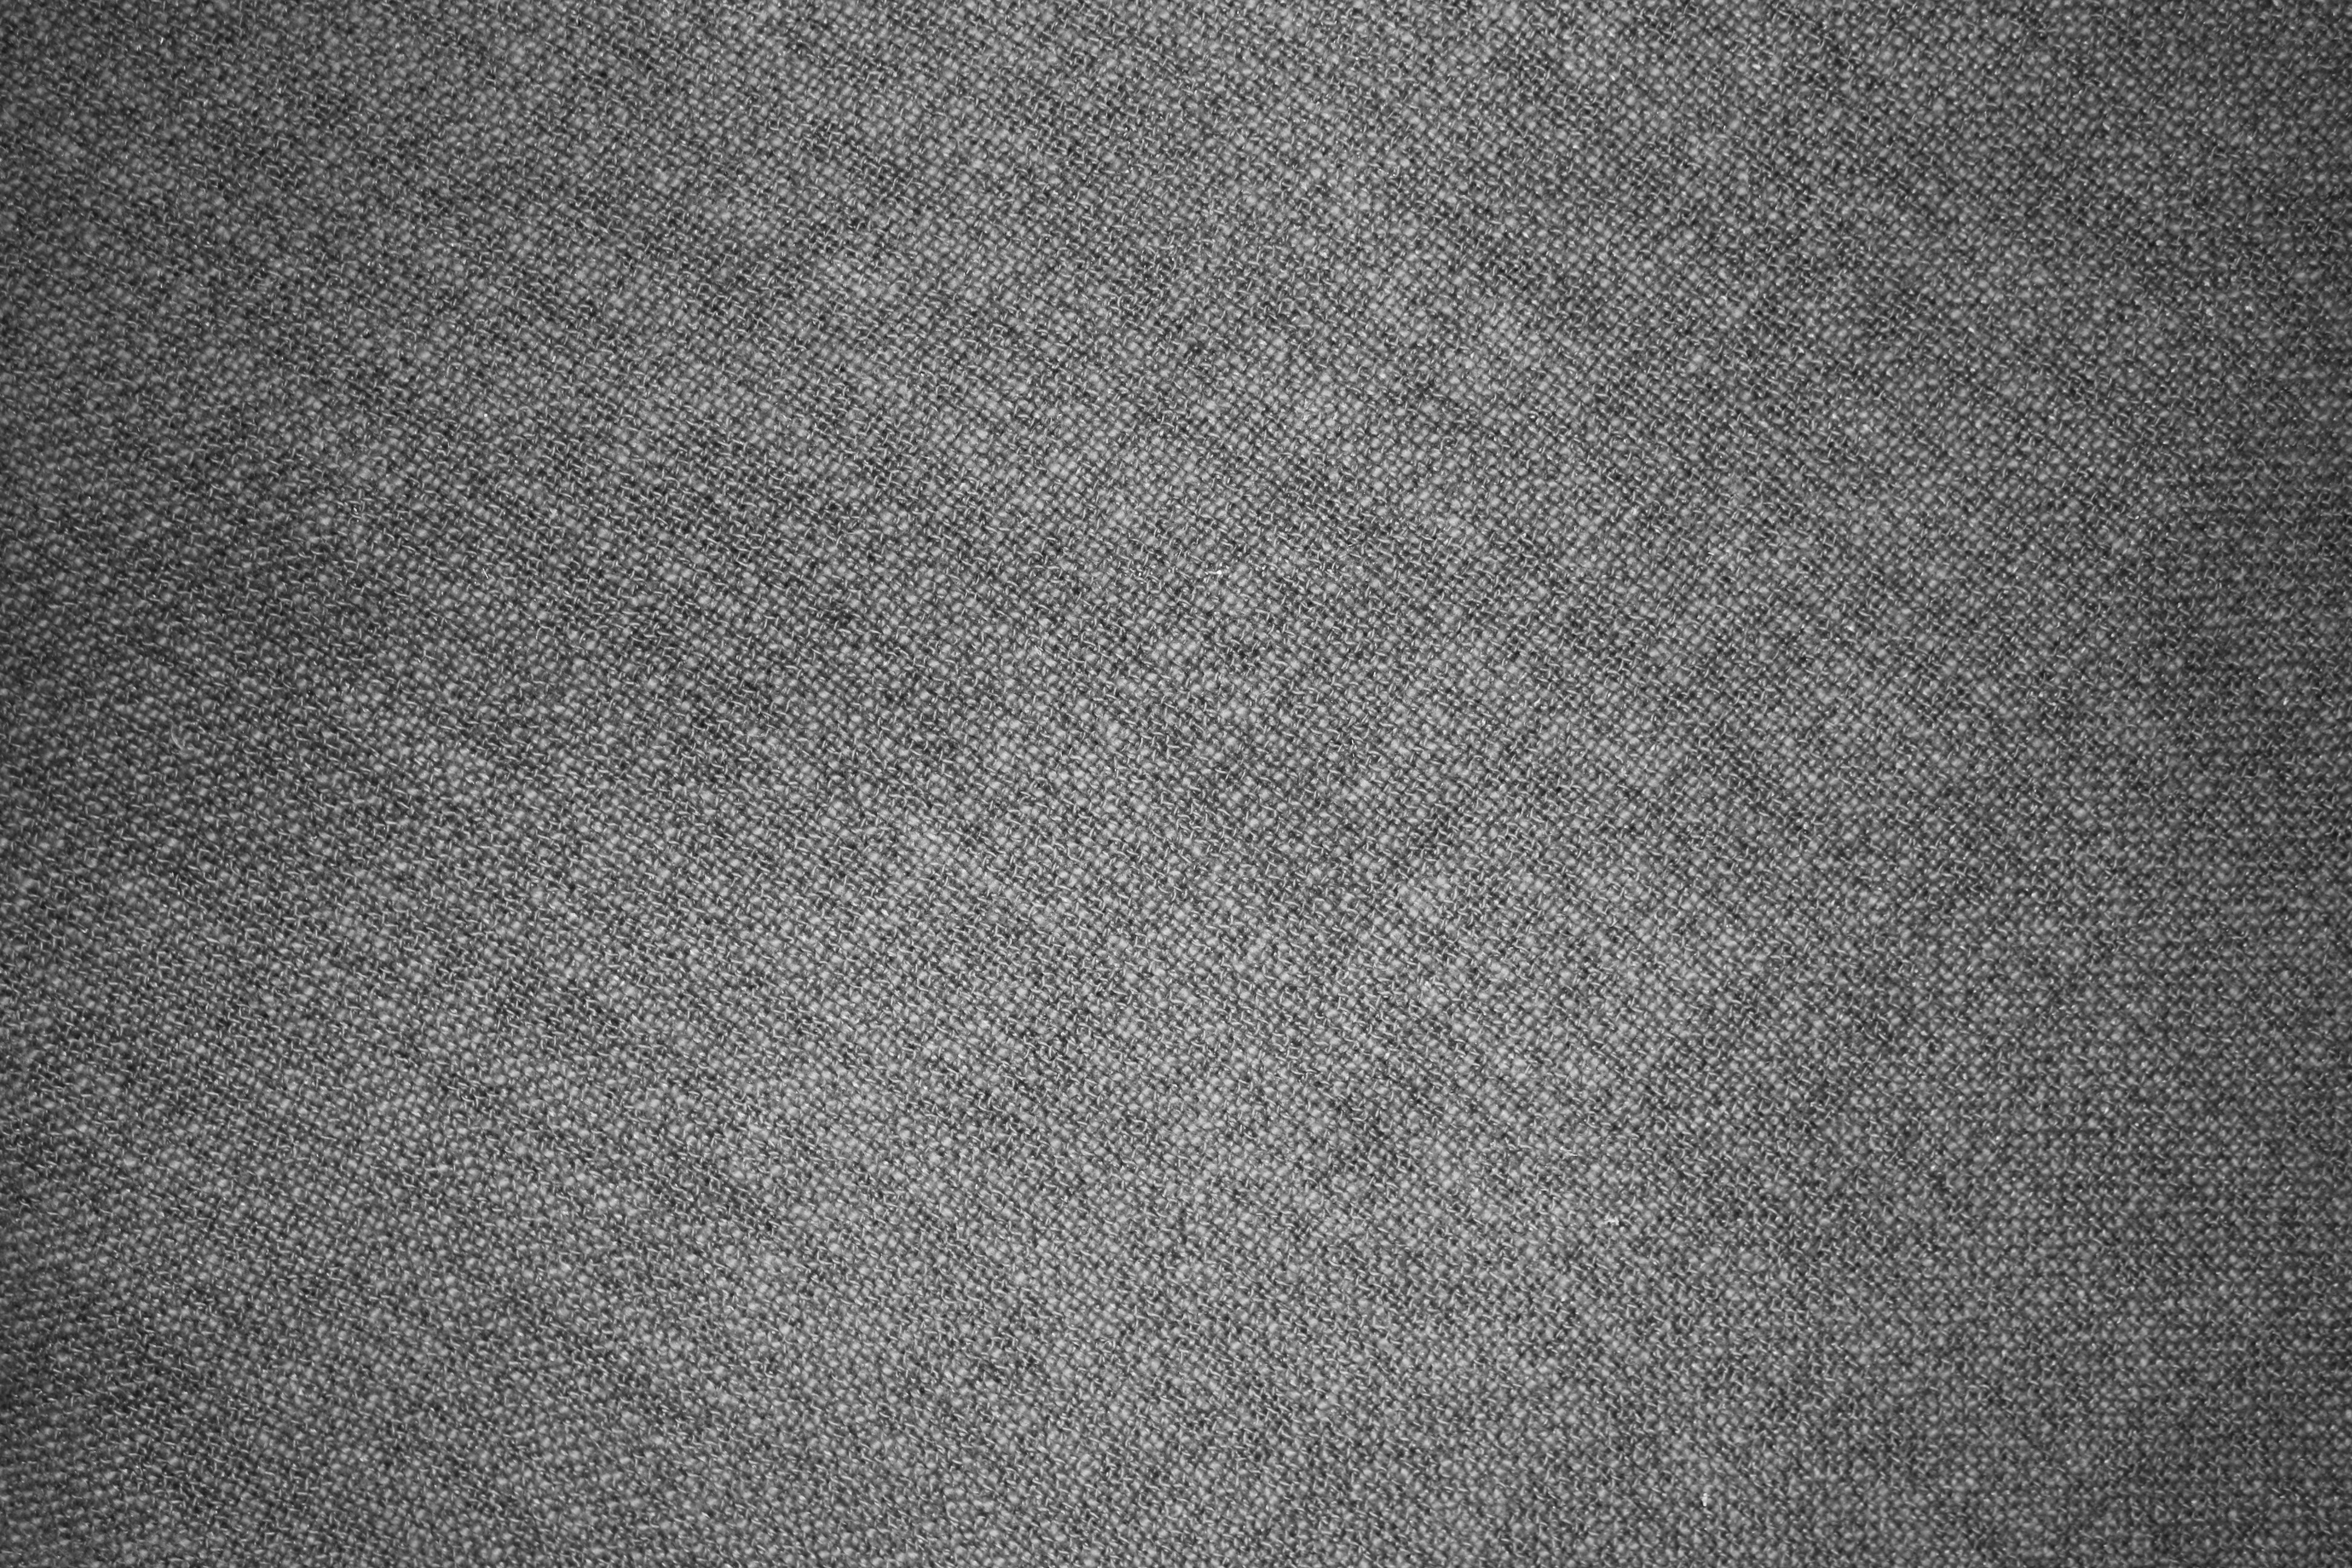 Gray Fabric Texture High Resolution Photo Dimensions